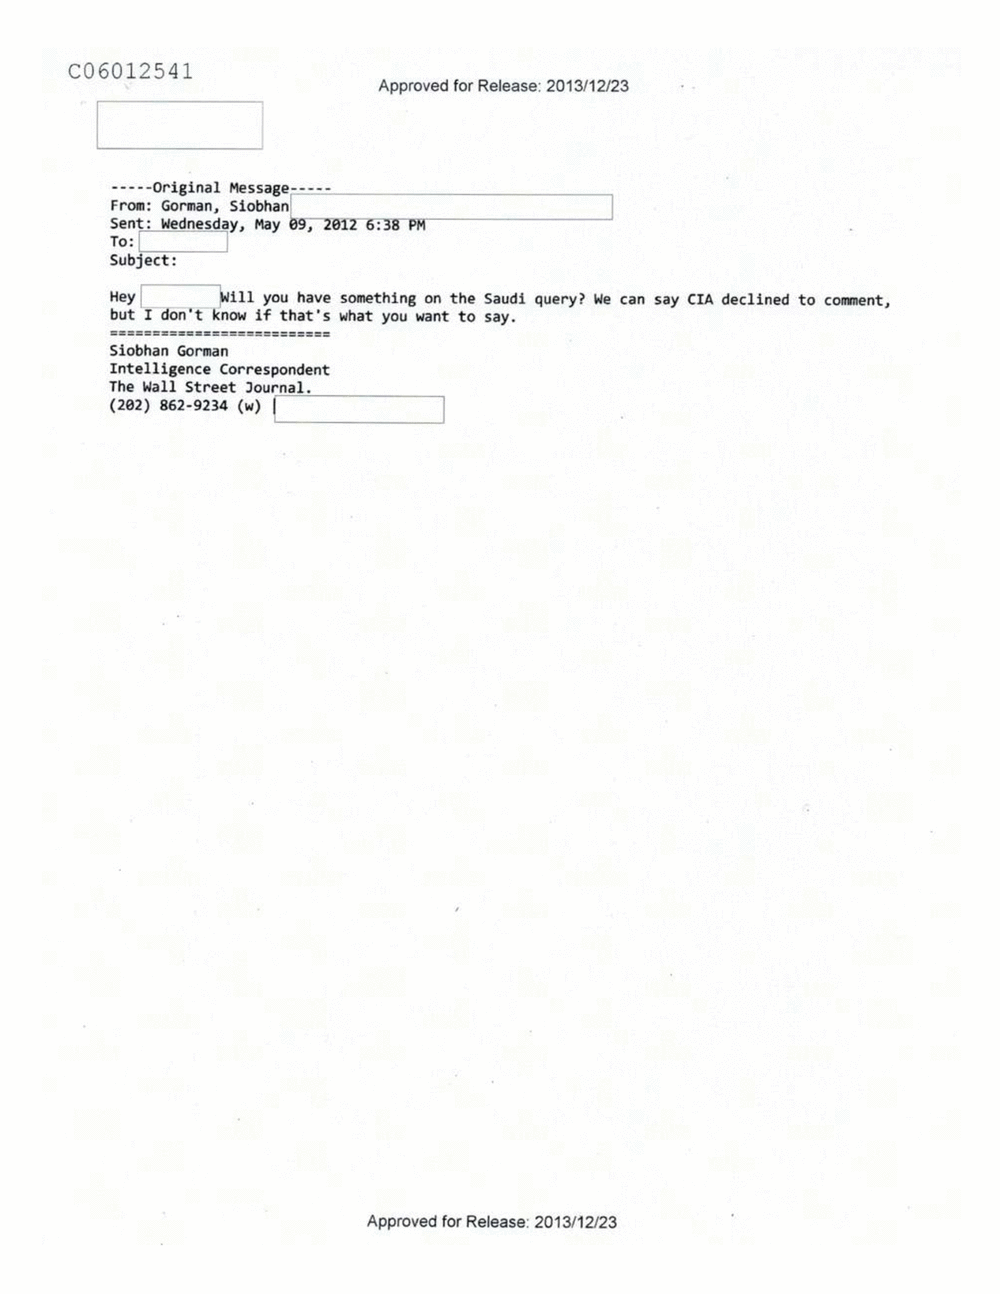 Page 74 from Email Correspondence Between Reporters and CIA Flacks